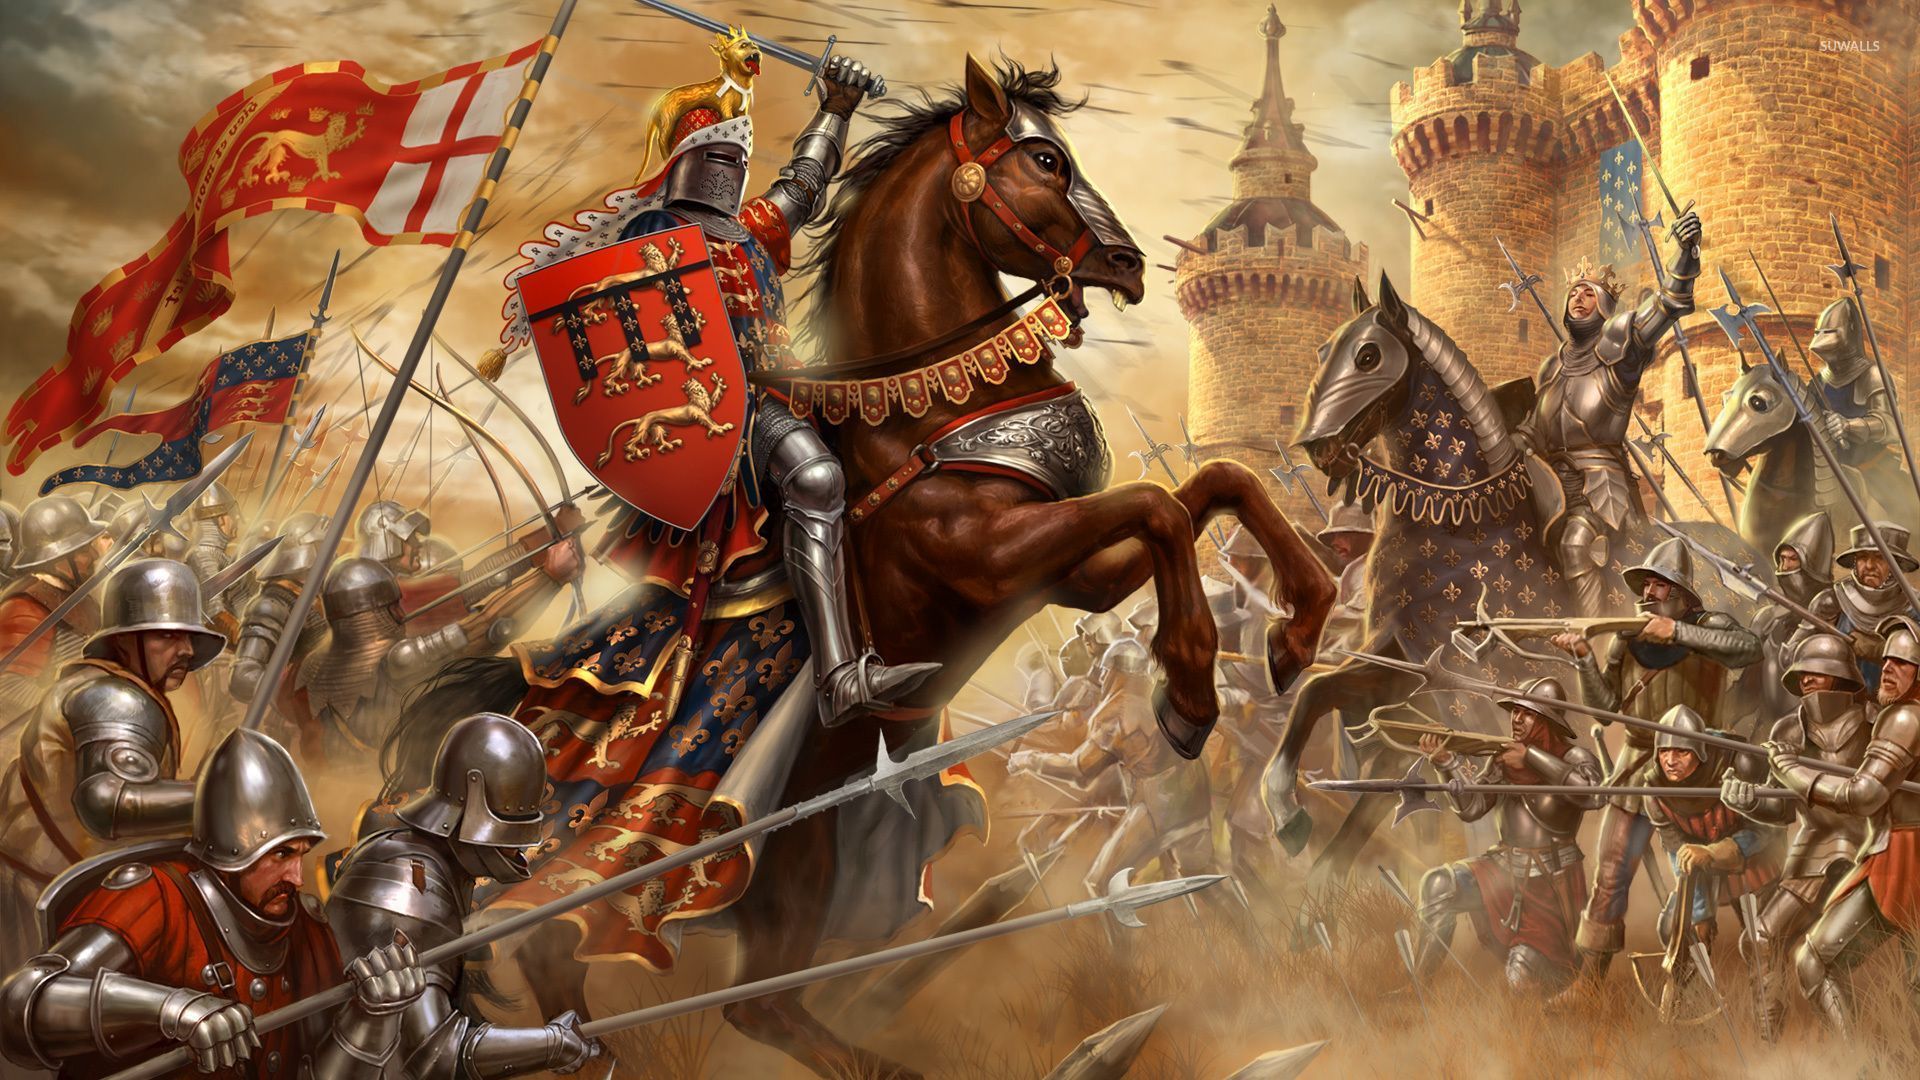 Knights in the battle wallpaper - Fantasy wallpapers - #53435